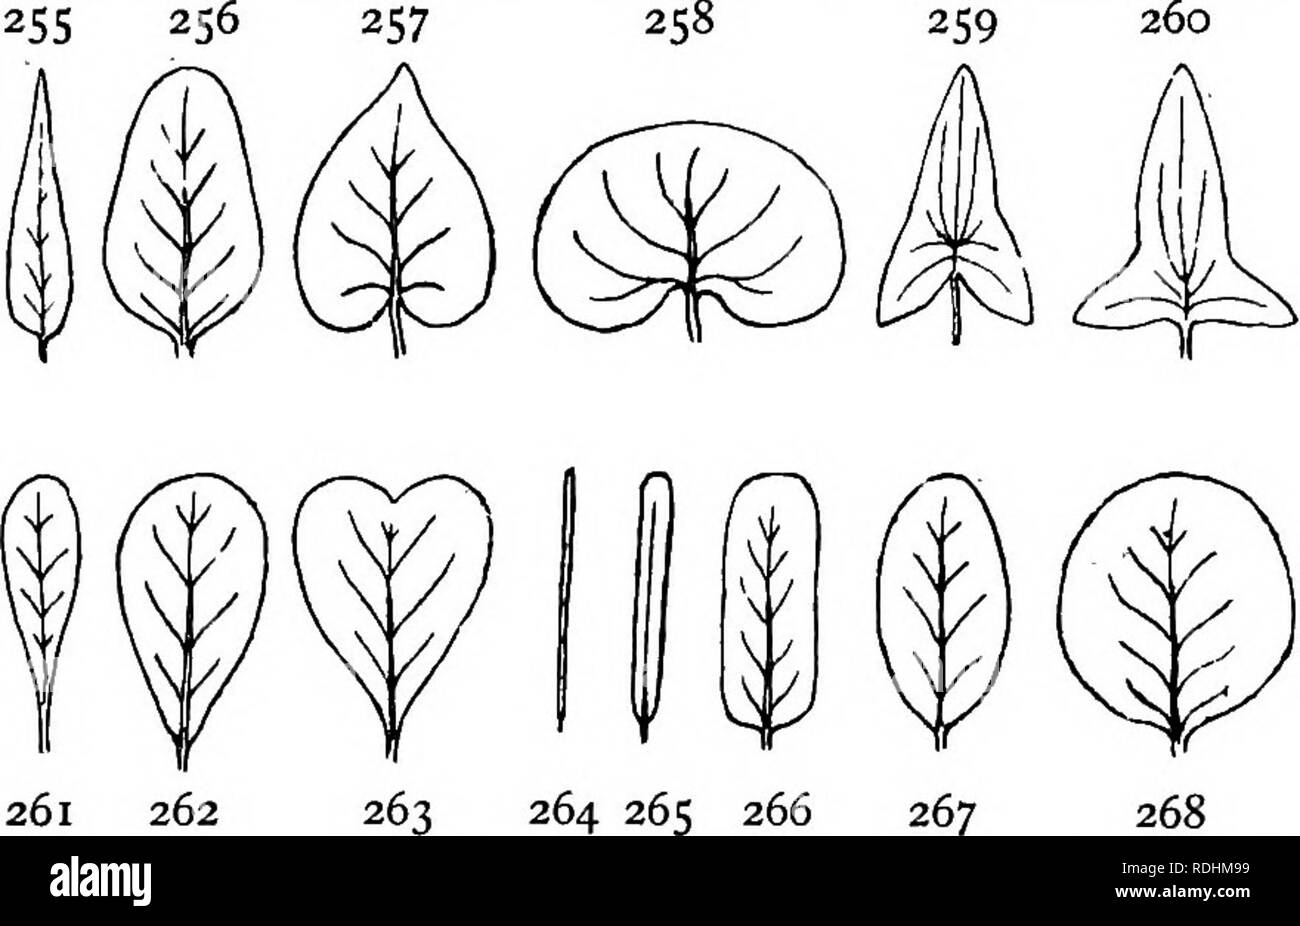 . Elementary botany . Botany. LEAVES 231 XII. Shape of the lamina.—Capillary = Ihin and flexible, like animal hairs. EUlform = thread-like. Acicn^r (fig. 264). Linear (fig. 265).. Subulate=awl-shaped. Lanceolate (fig. 255). Oblong (fig. 266). Ellipti- cal (fig. 267). Ovate (fig. 256). Orbicular or rotund (fig. 268). Angular= having three or more angles. Deltoid=like the Greek letter A. Obovate (fig. 262). Cuneate = wedge-shaped and attached by its point to the petiole. Spathulate (fig. 261). Cordate (fig. 257). Obcordate (fig. 263). Reniform (fig. 258). Auriculate, when the base of the lamina  Stock Photo